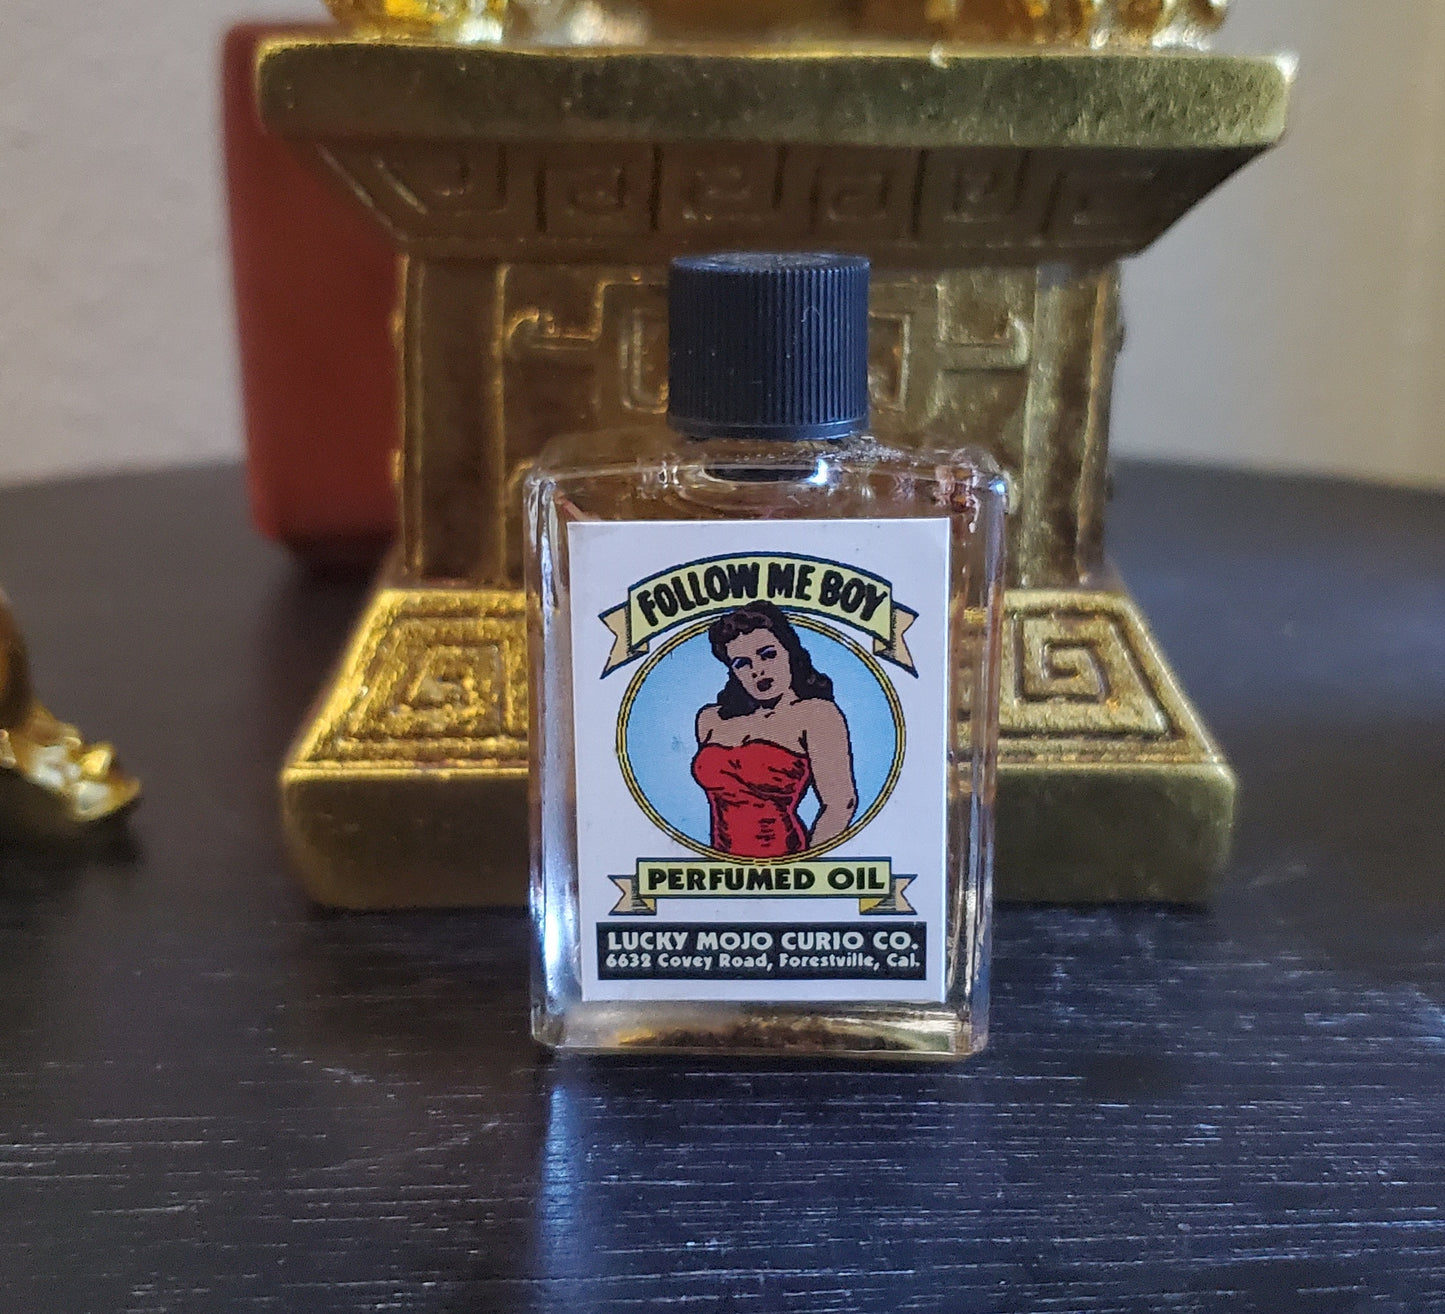 LuckyMojoCurioCo "Follow Me Boy Oil" Anointing / Conjure Oil #GreatDeal #LuckyMojoCurioCo #LuckyMojo #EffectiveOils #MustHave